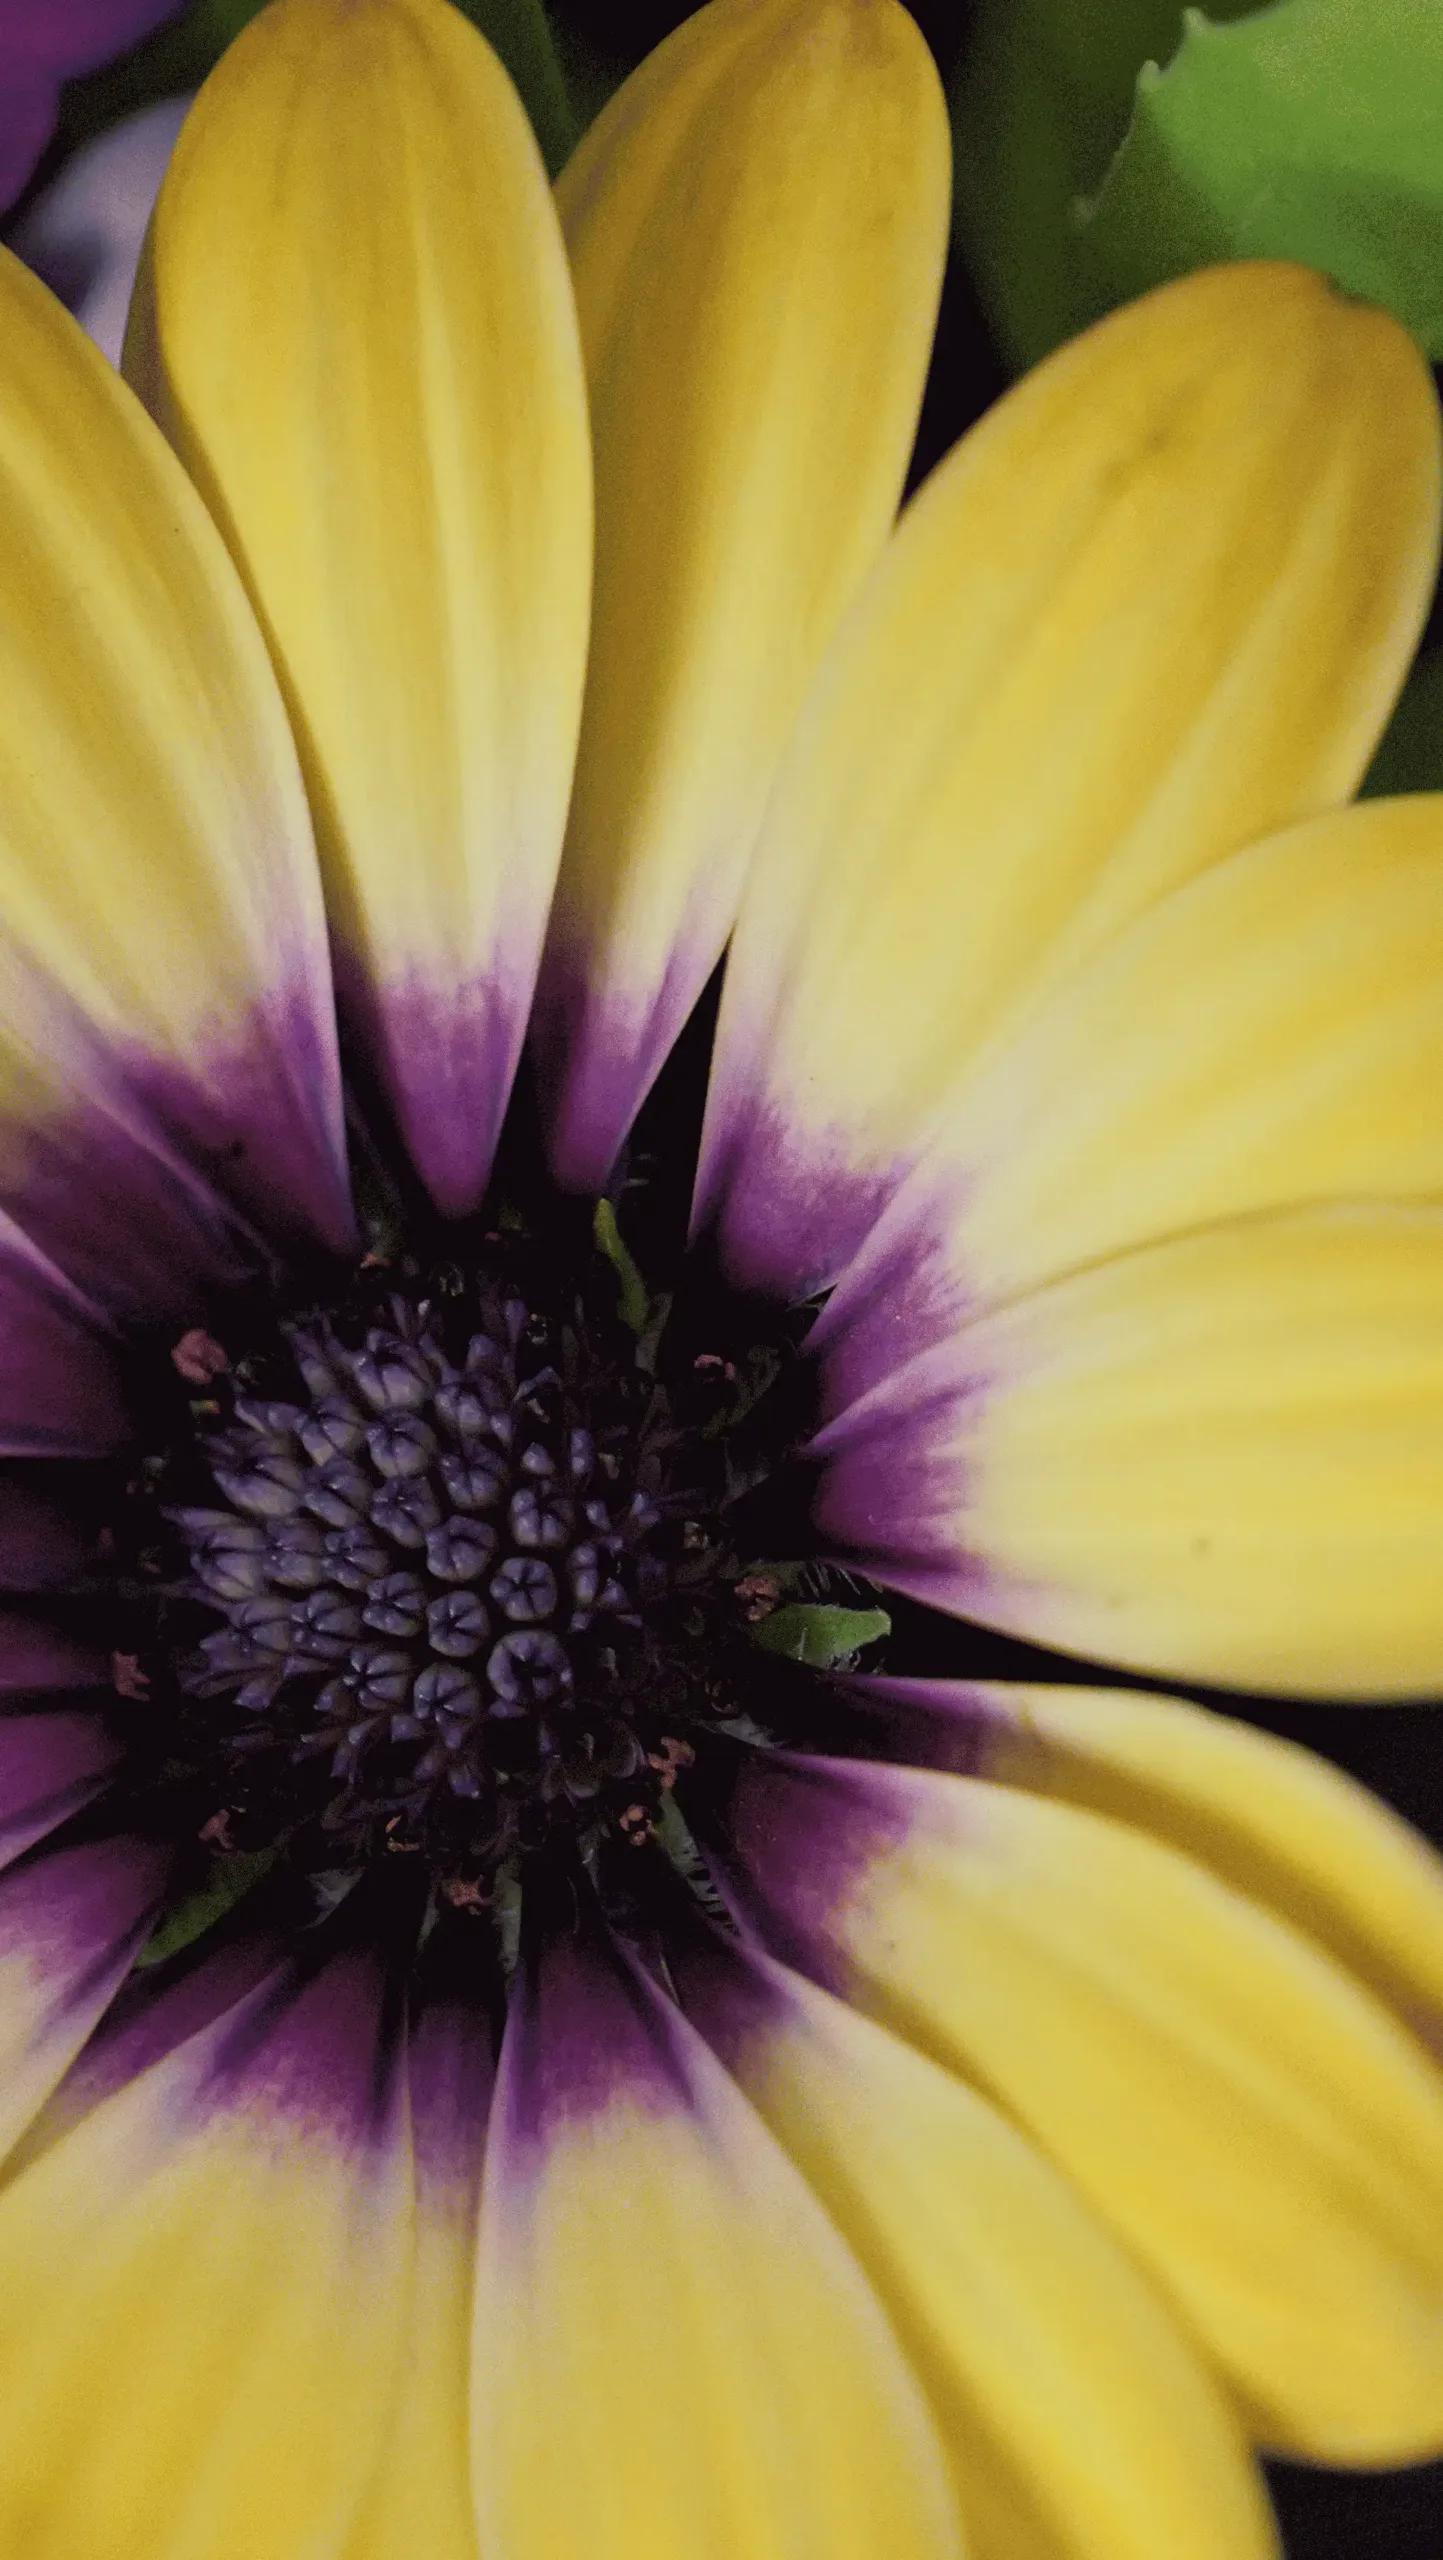 A close-up of a yellow flower with purple centers